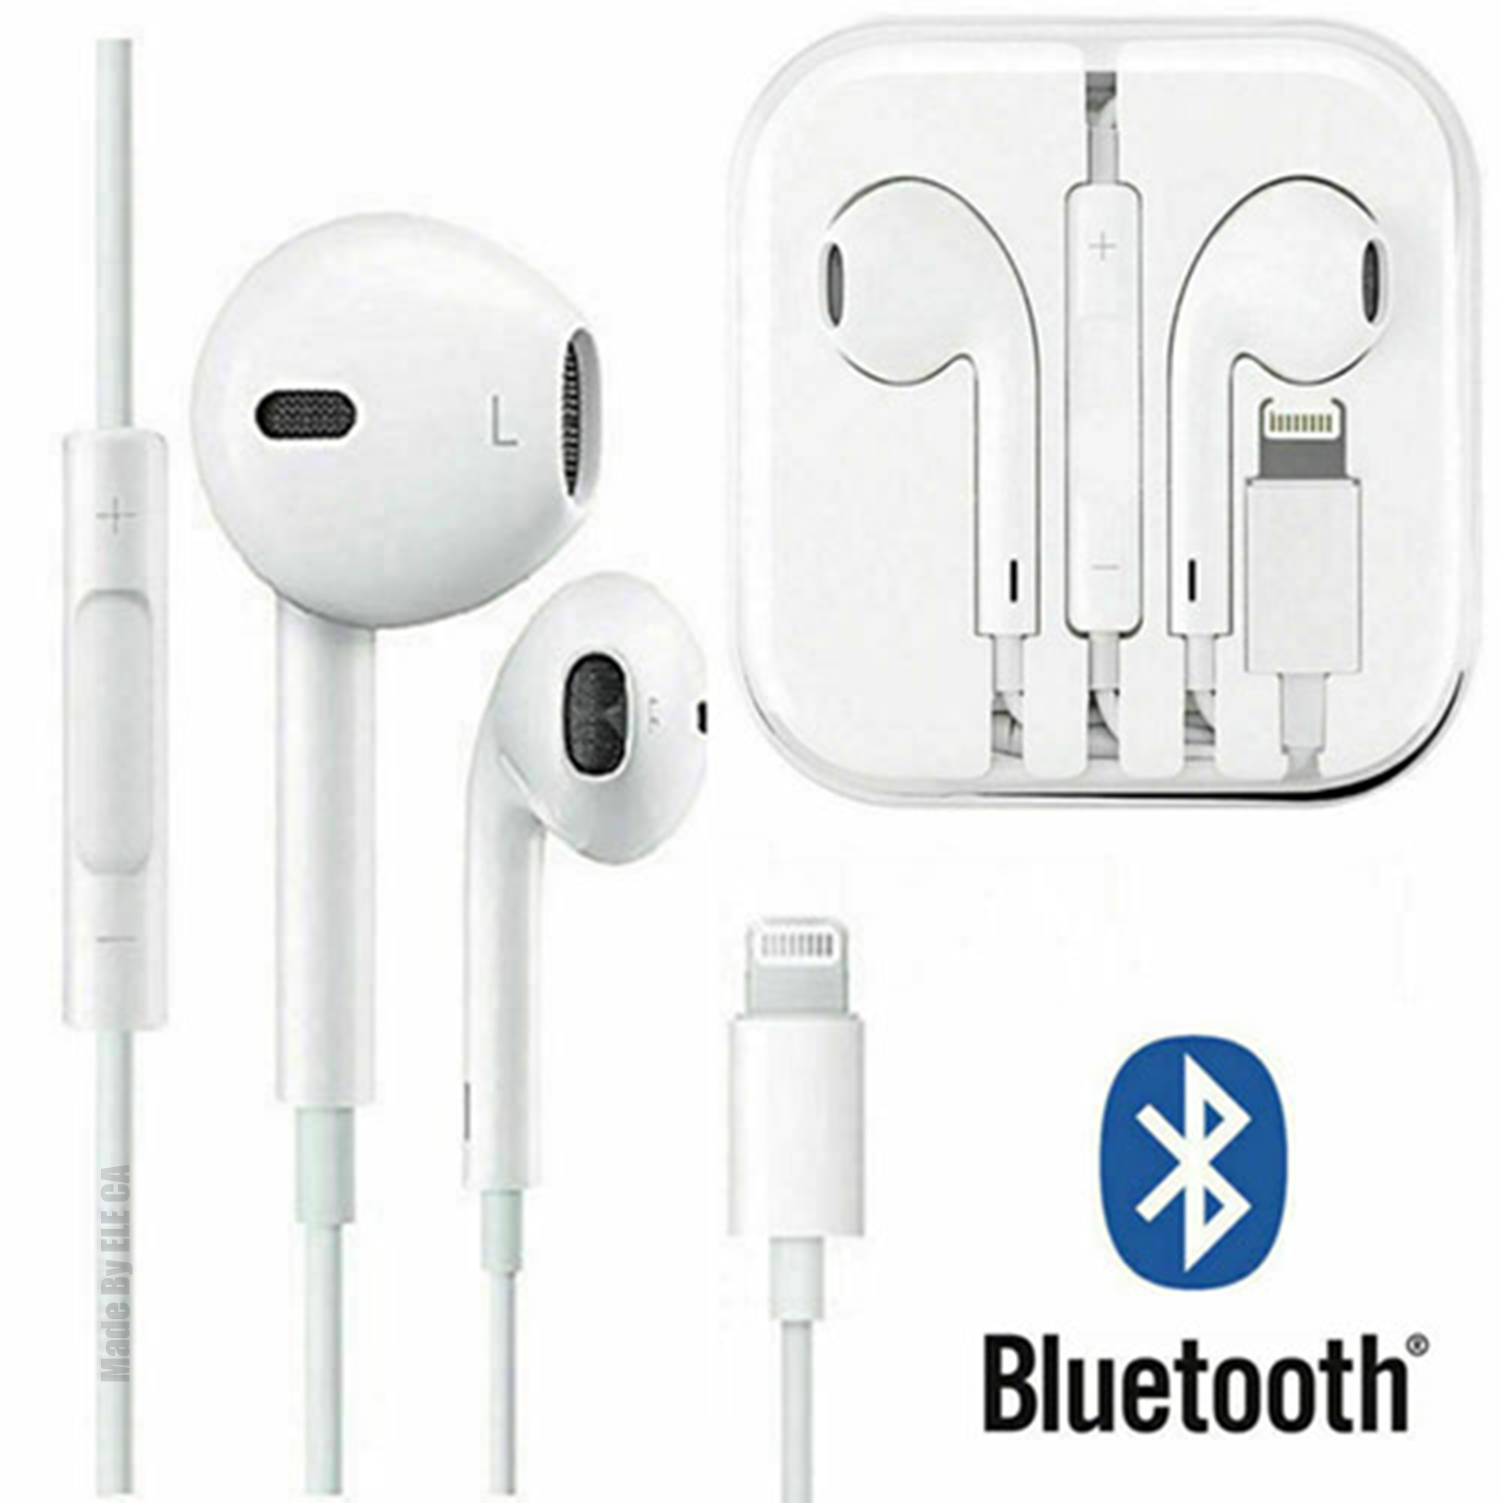 iPhone 7 8 Plus X XS MAX XR 11 Pro Wired Headphones Headset Earbuds